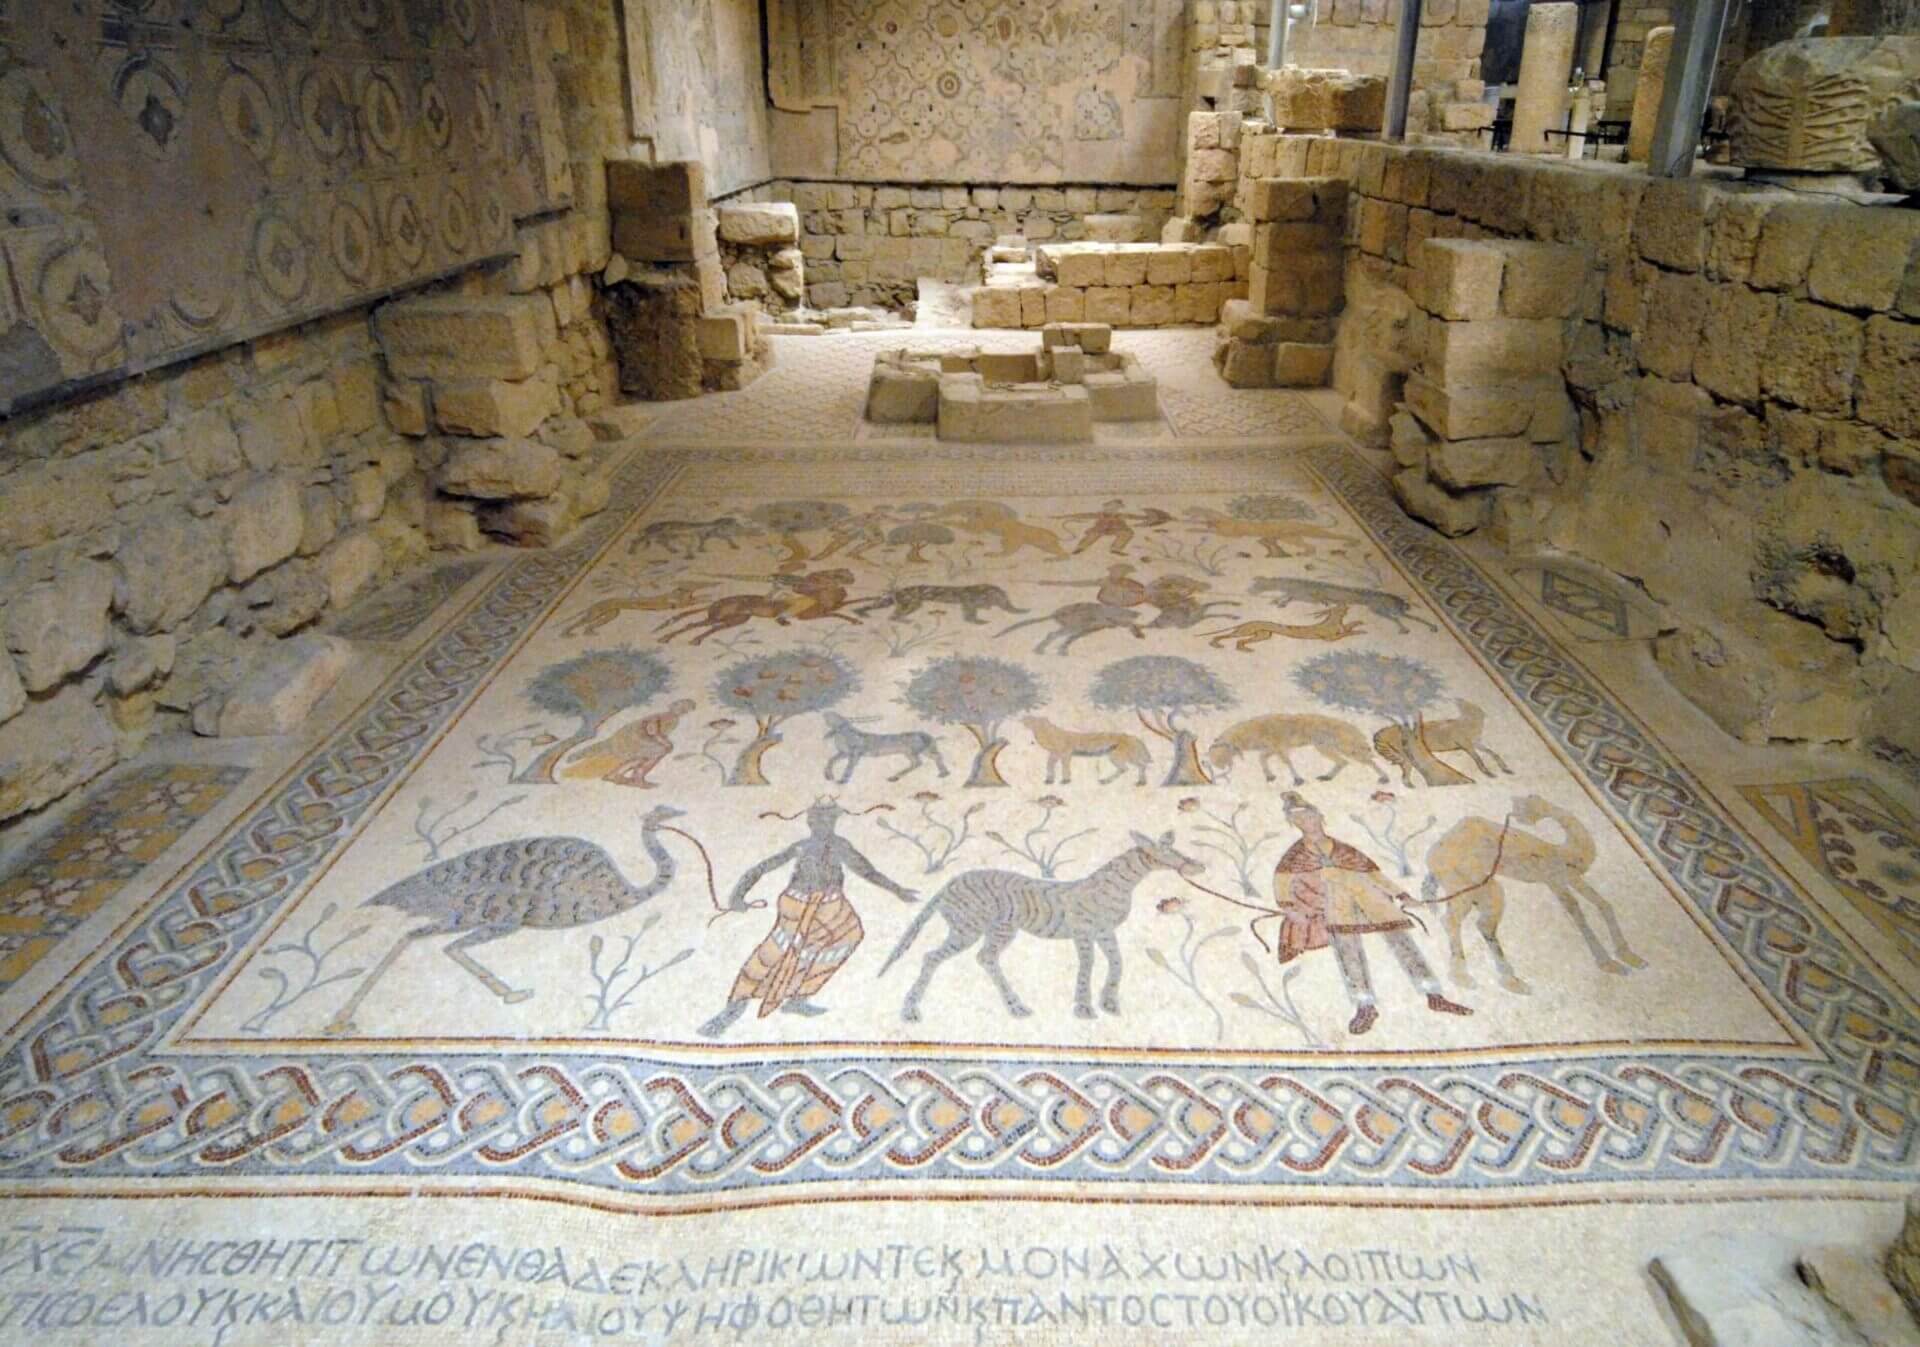 mount-nebo-madaba-governorate-jordan-ancient-byzantine-mosaic-in-the-diaconicon-baptistery-of-the-basilica-of-moses-depicting-pastoral-and-hunting-scenes-african-fauna-photo-by-mtorres-stockpack-istock